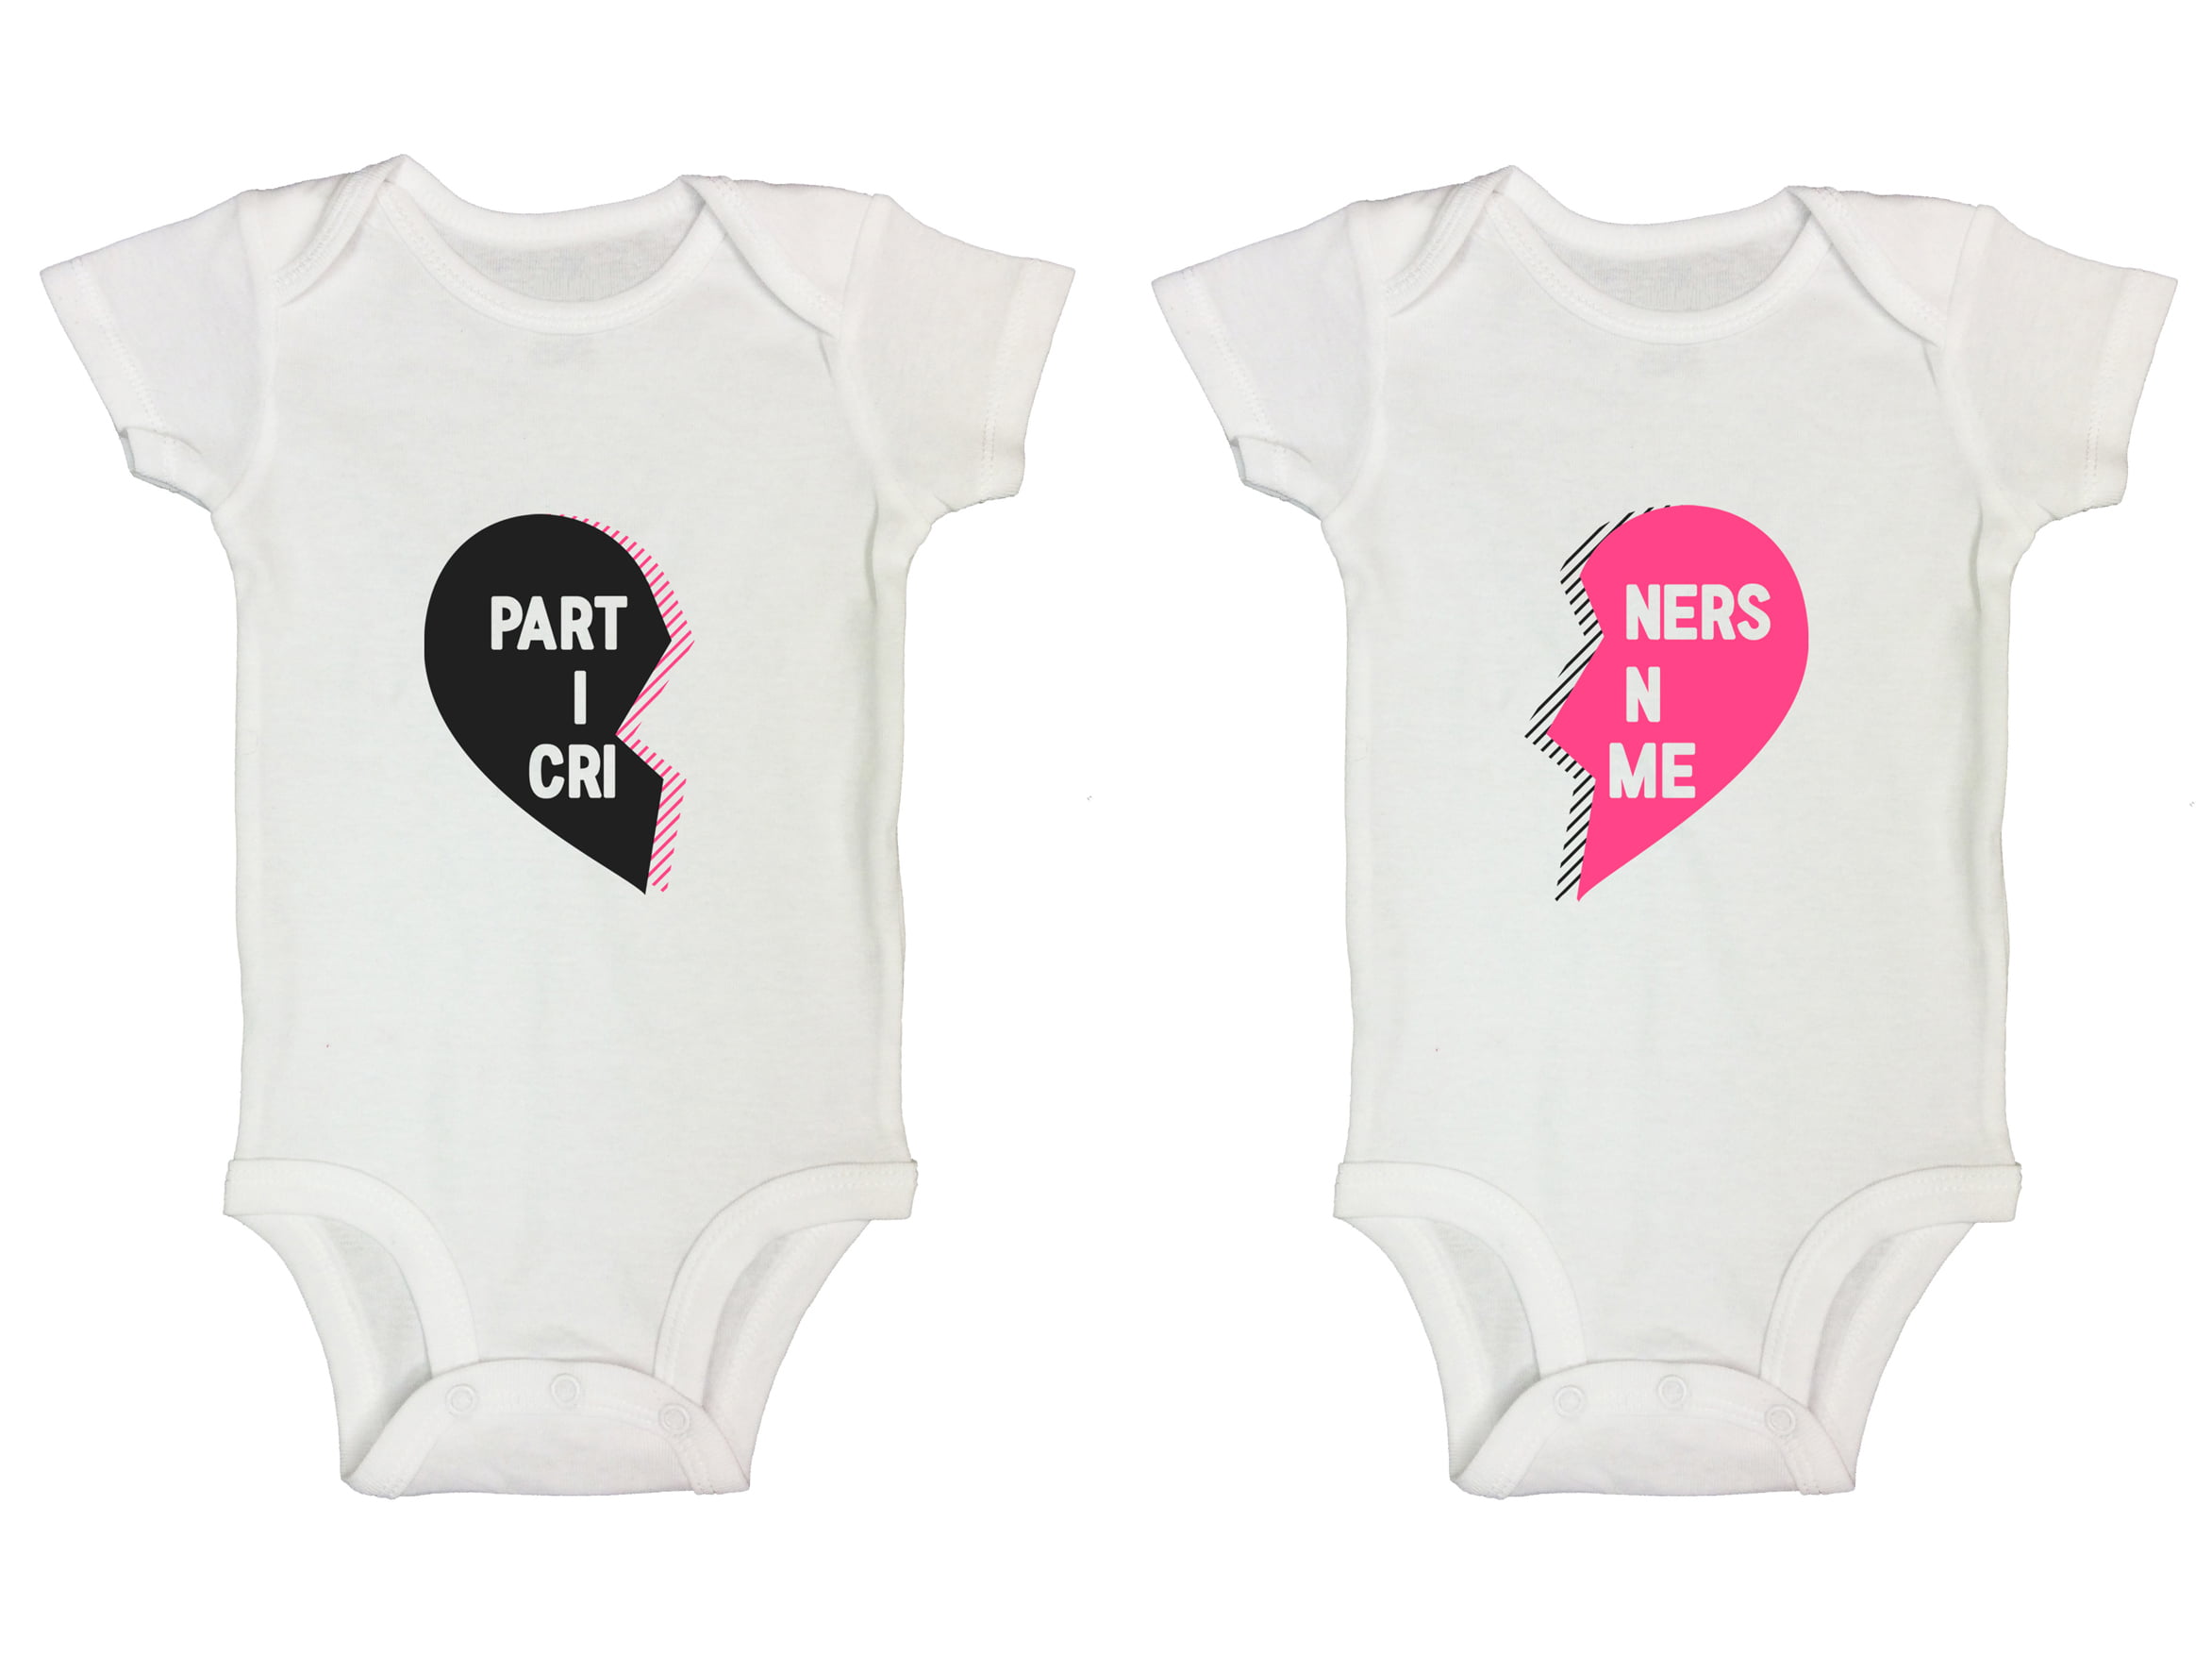 Unisex Infant Twins Baby Casual Bodysuit Clothes Cute Matching Outfits Gift Kids